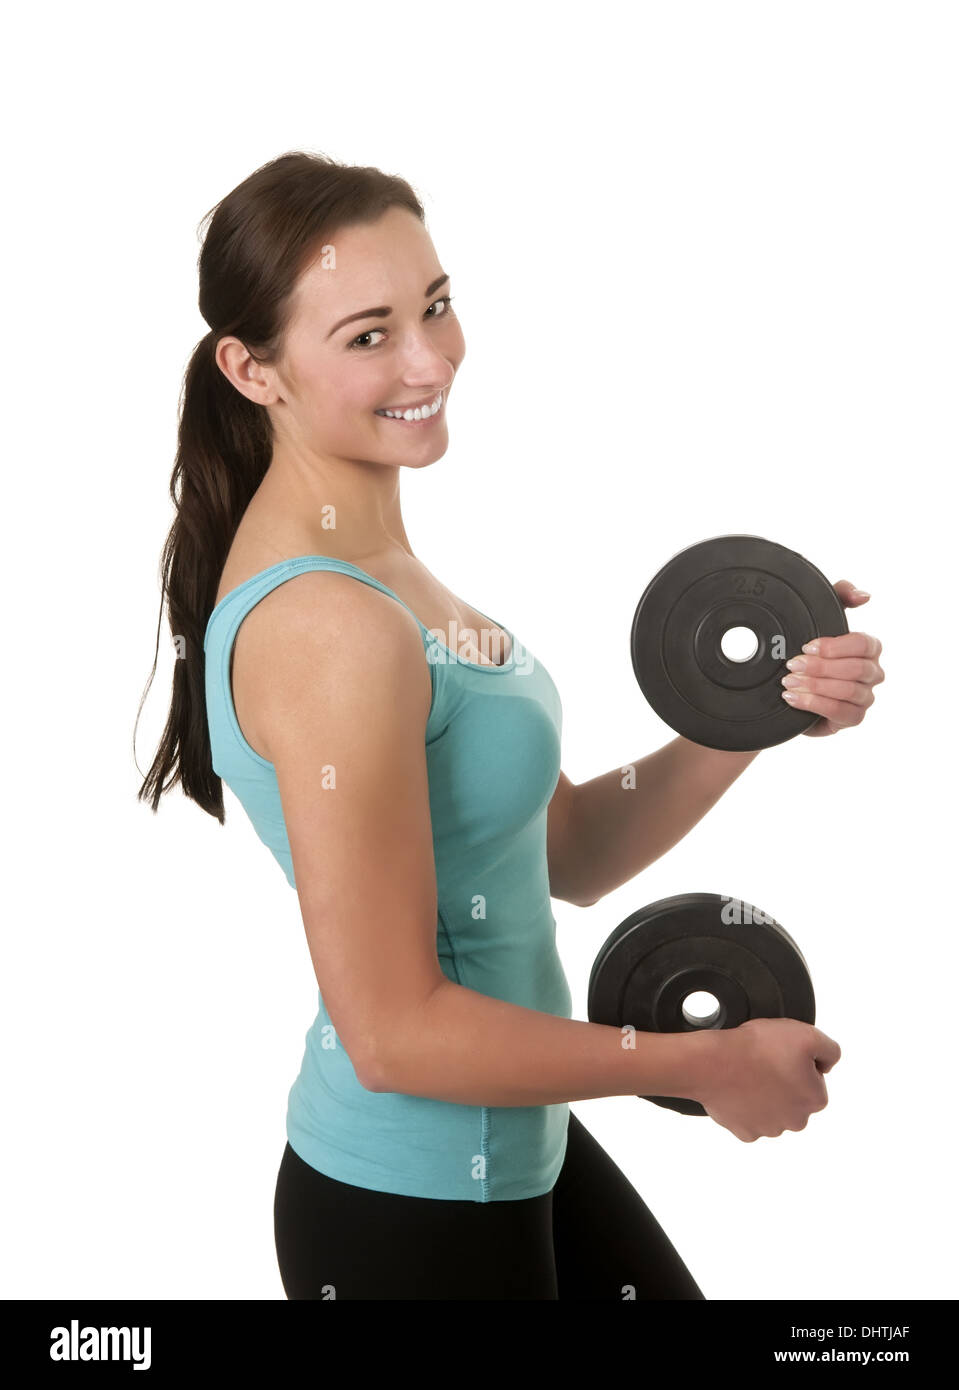 woman with dumbbells Stock Photo